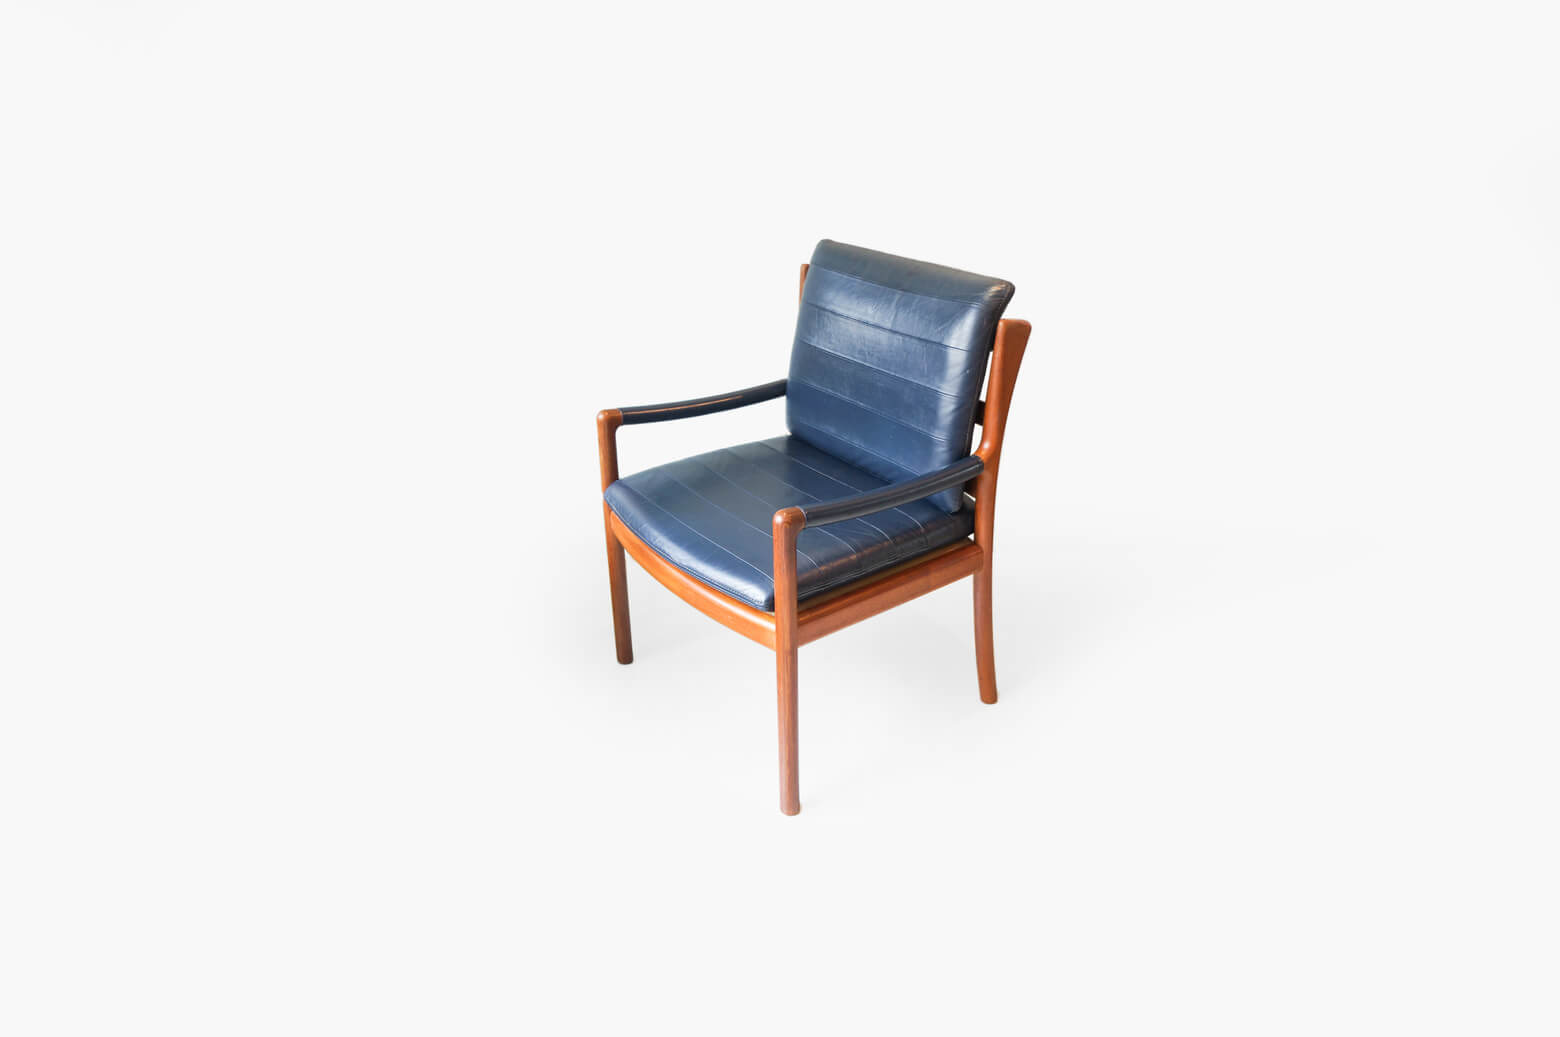 Vintage HITA CRAFTS Arm Chair/日田工芸 ヴィンテージ アームチェア